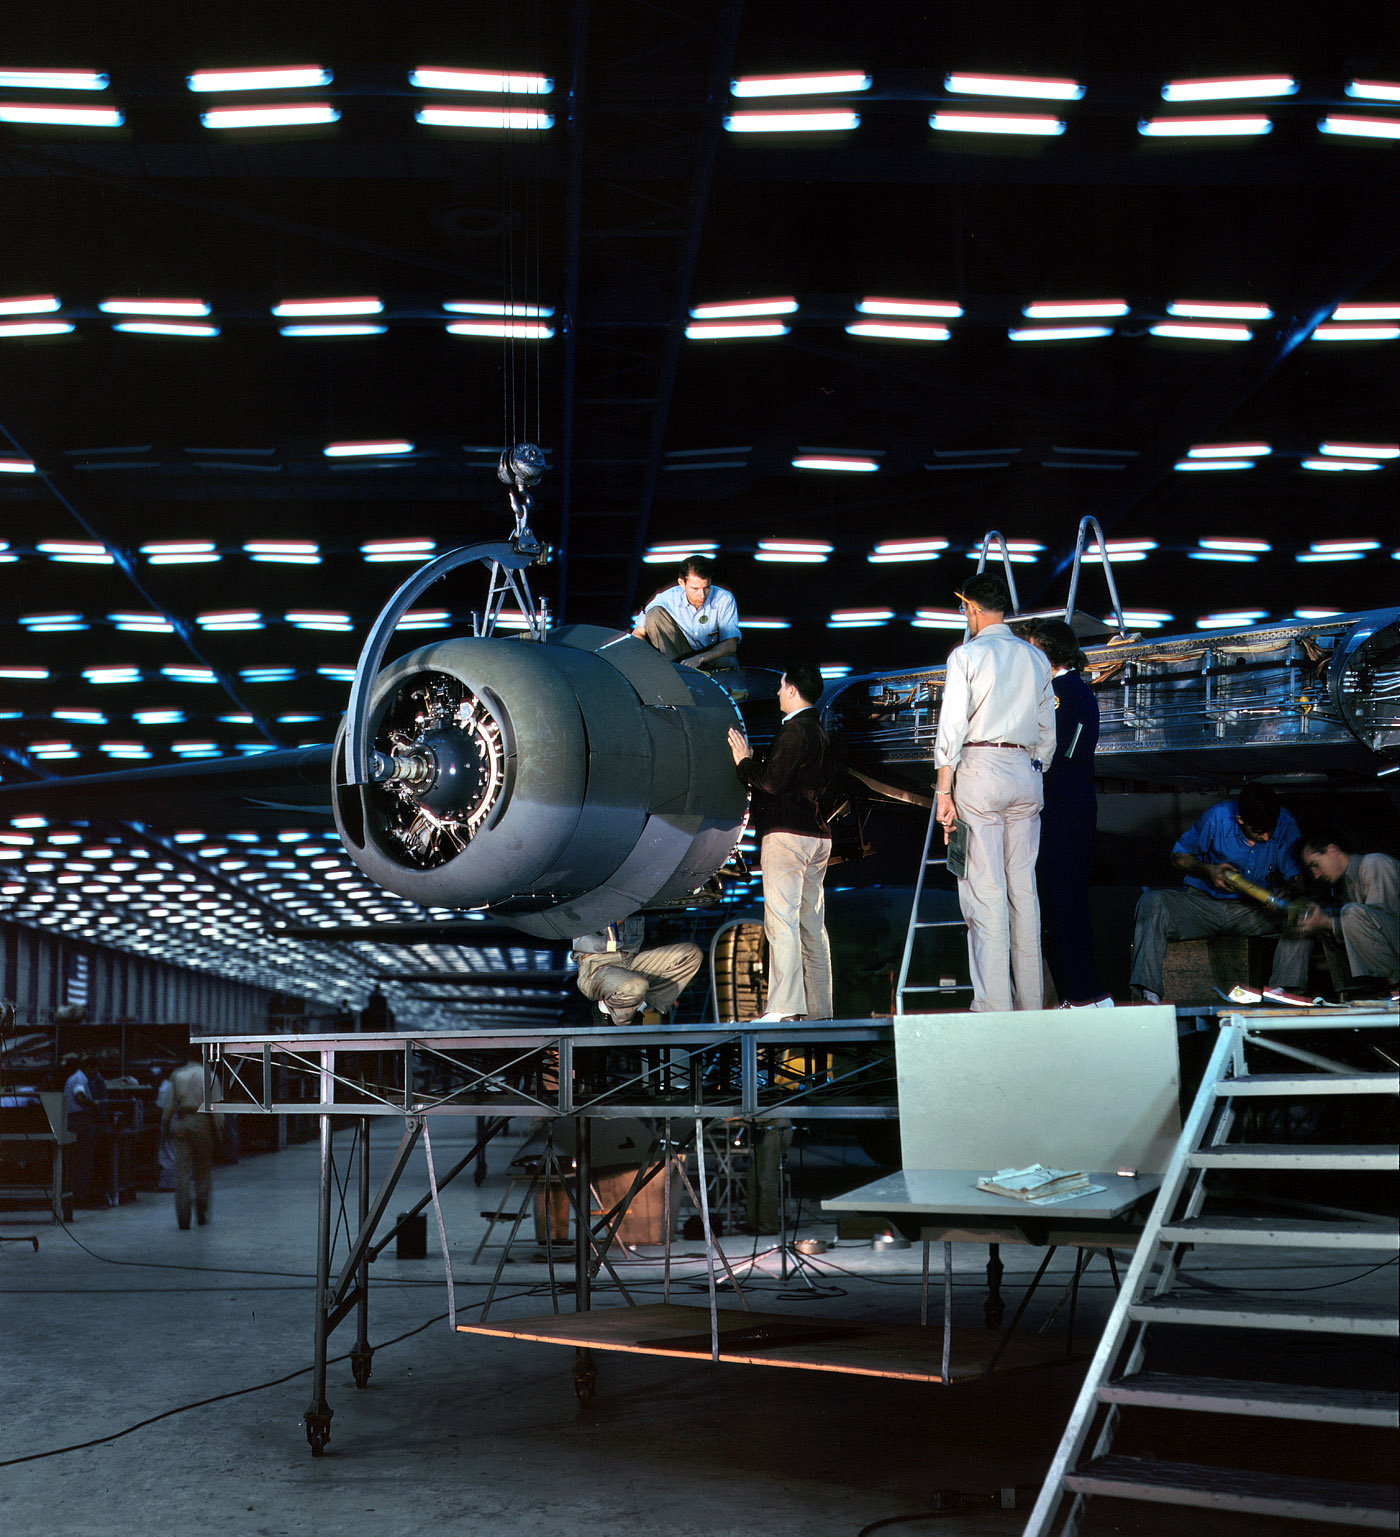 October 1942. Transport assembly hall at the Consolidated Aircraft Corporation plant in Fort Worth, Texas. Lowering an engine into place. View full size. 4x5 Kodachrome transparency by Howard Hollem for the Office of War Information.